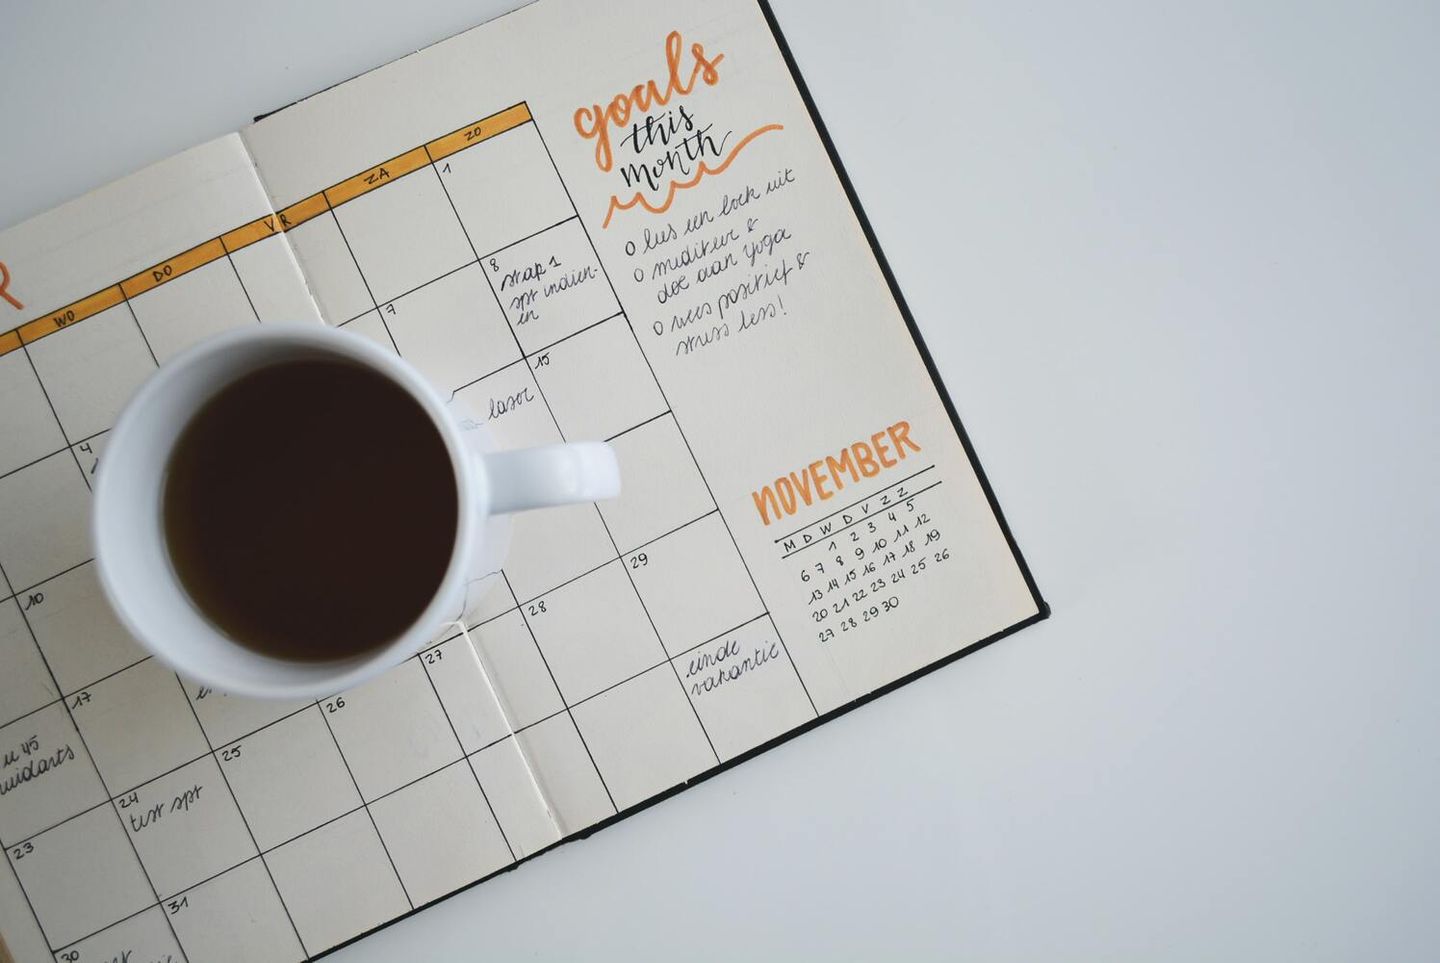 Staying organized with a calendar visual of your projects can help you stay productive.